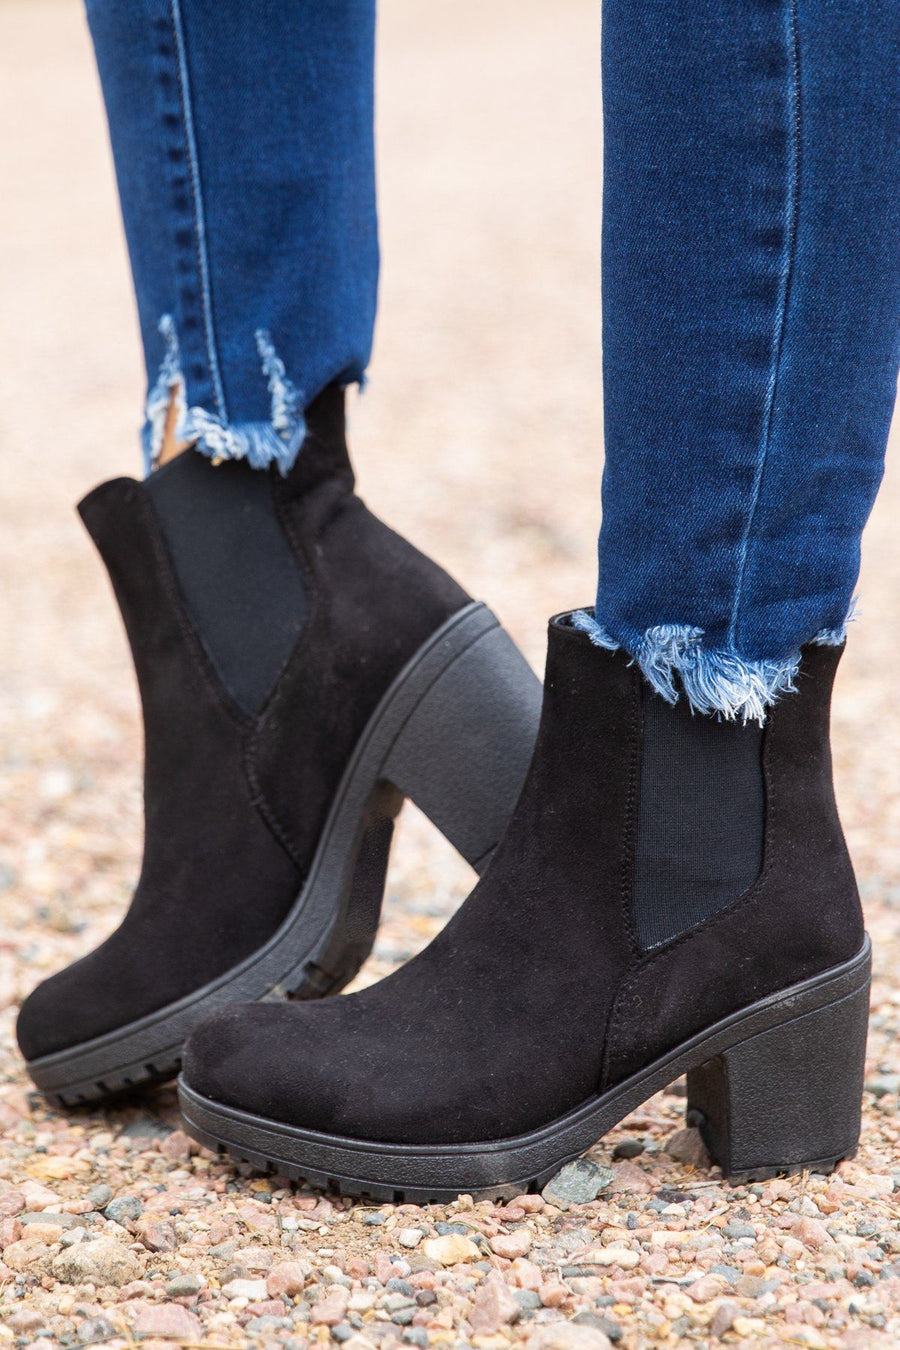 Cute Boots For All Occasions | Shop Great & Affordable Boots - Filly Flair